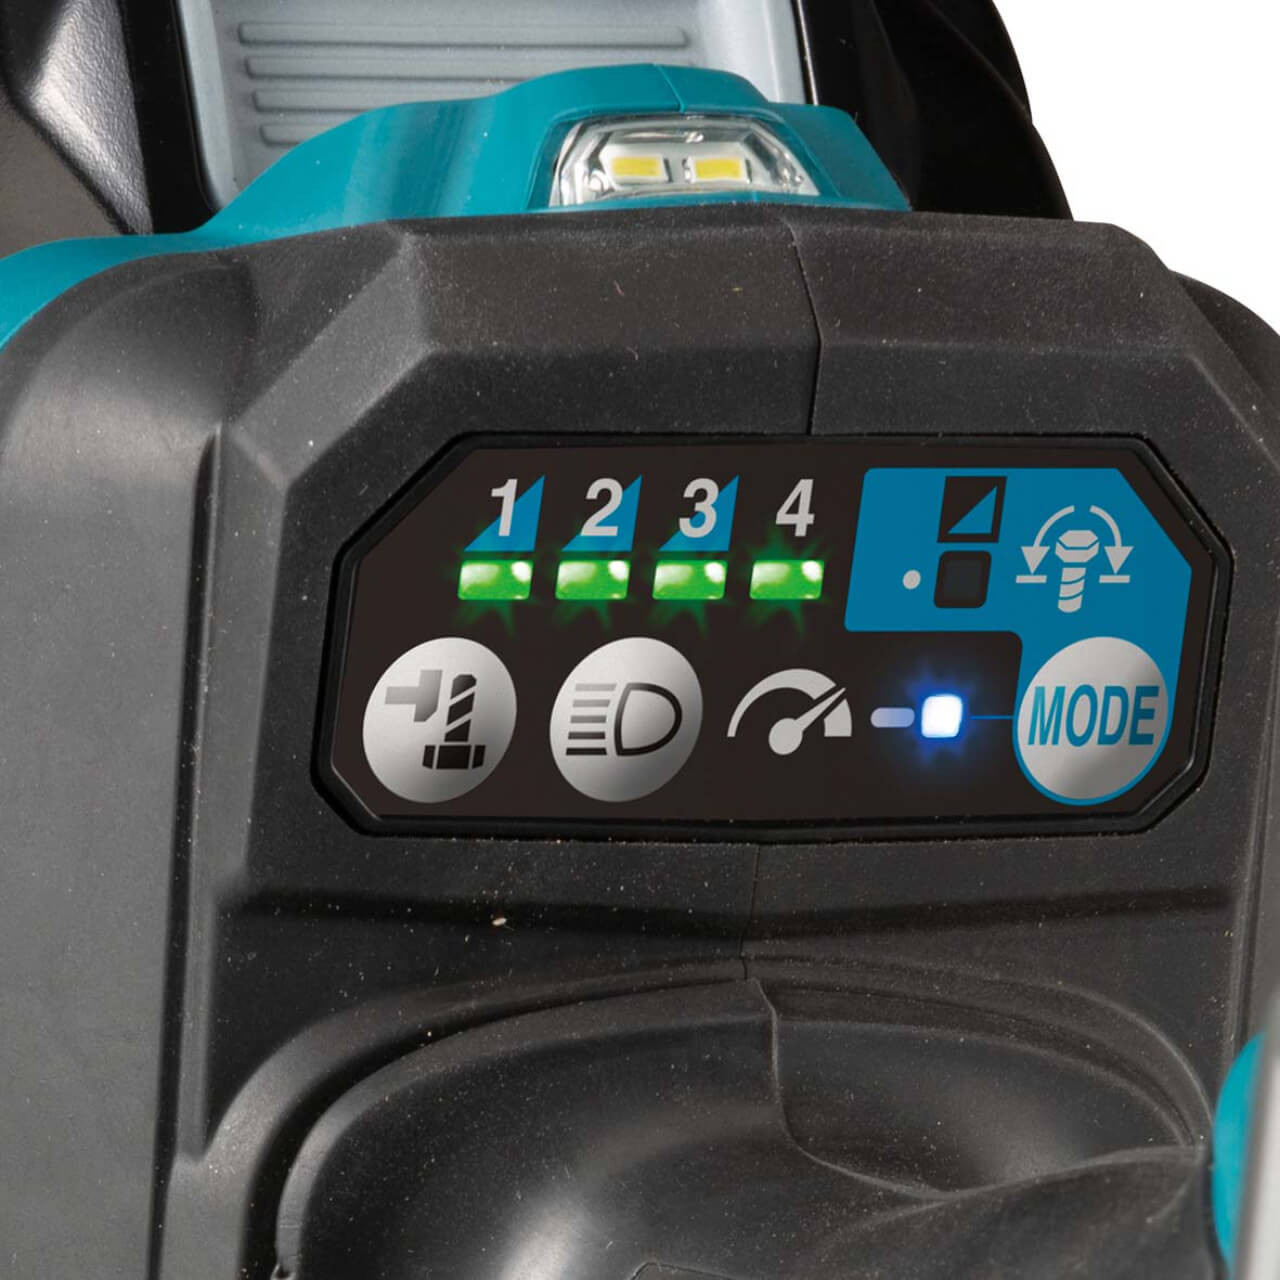 Makita 40V Max BRUSHLESS 3/4” Impact Wrench - Tool Only